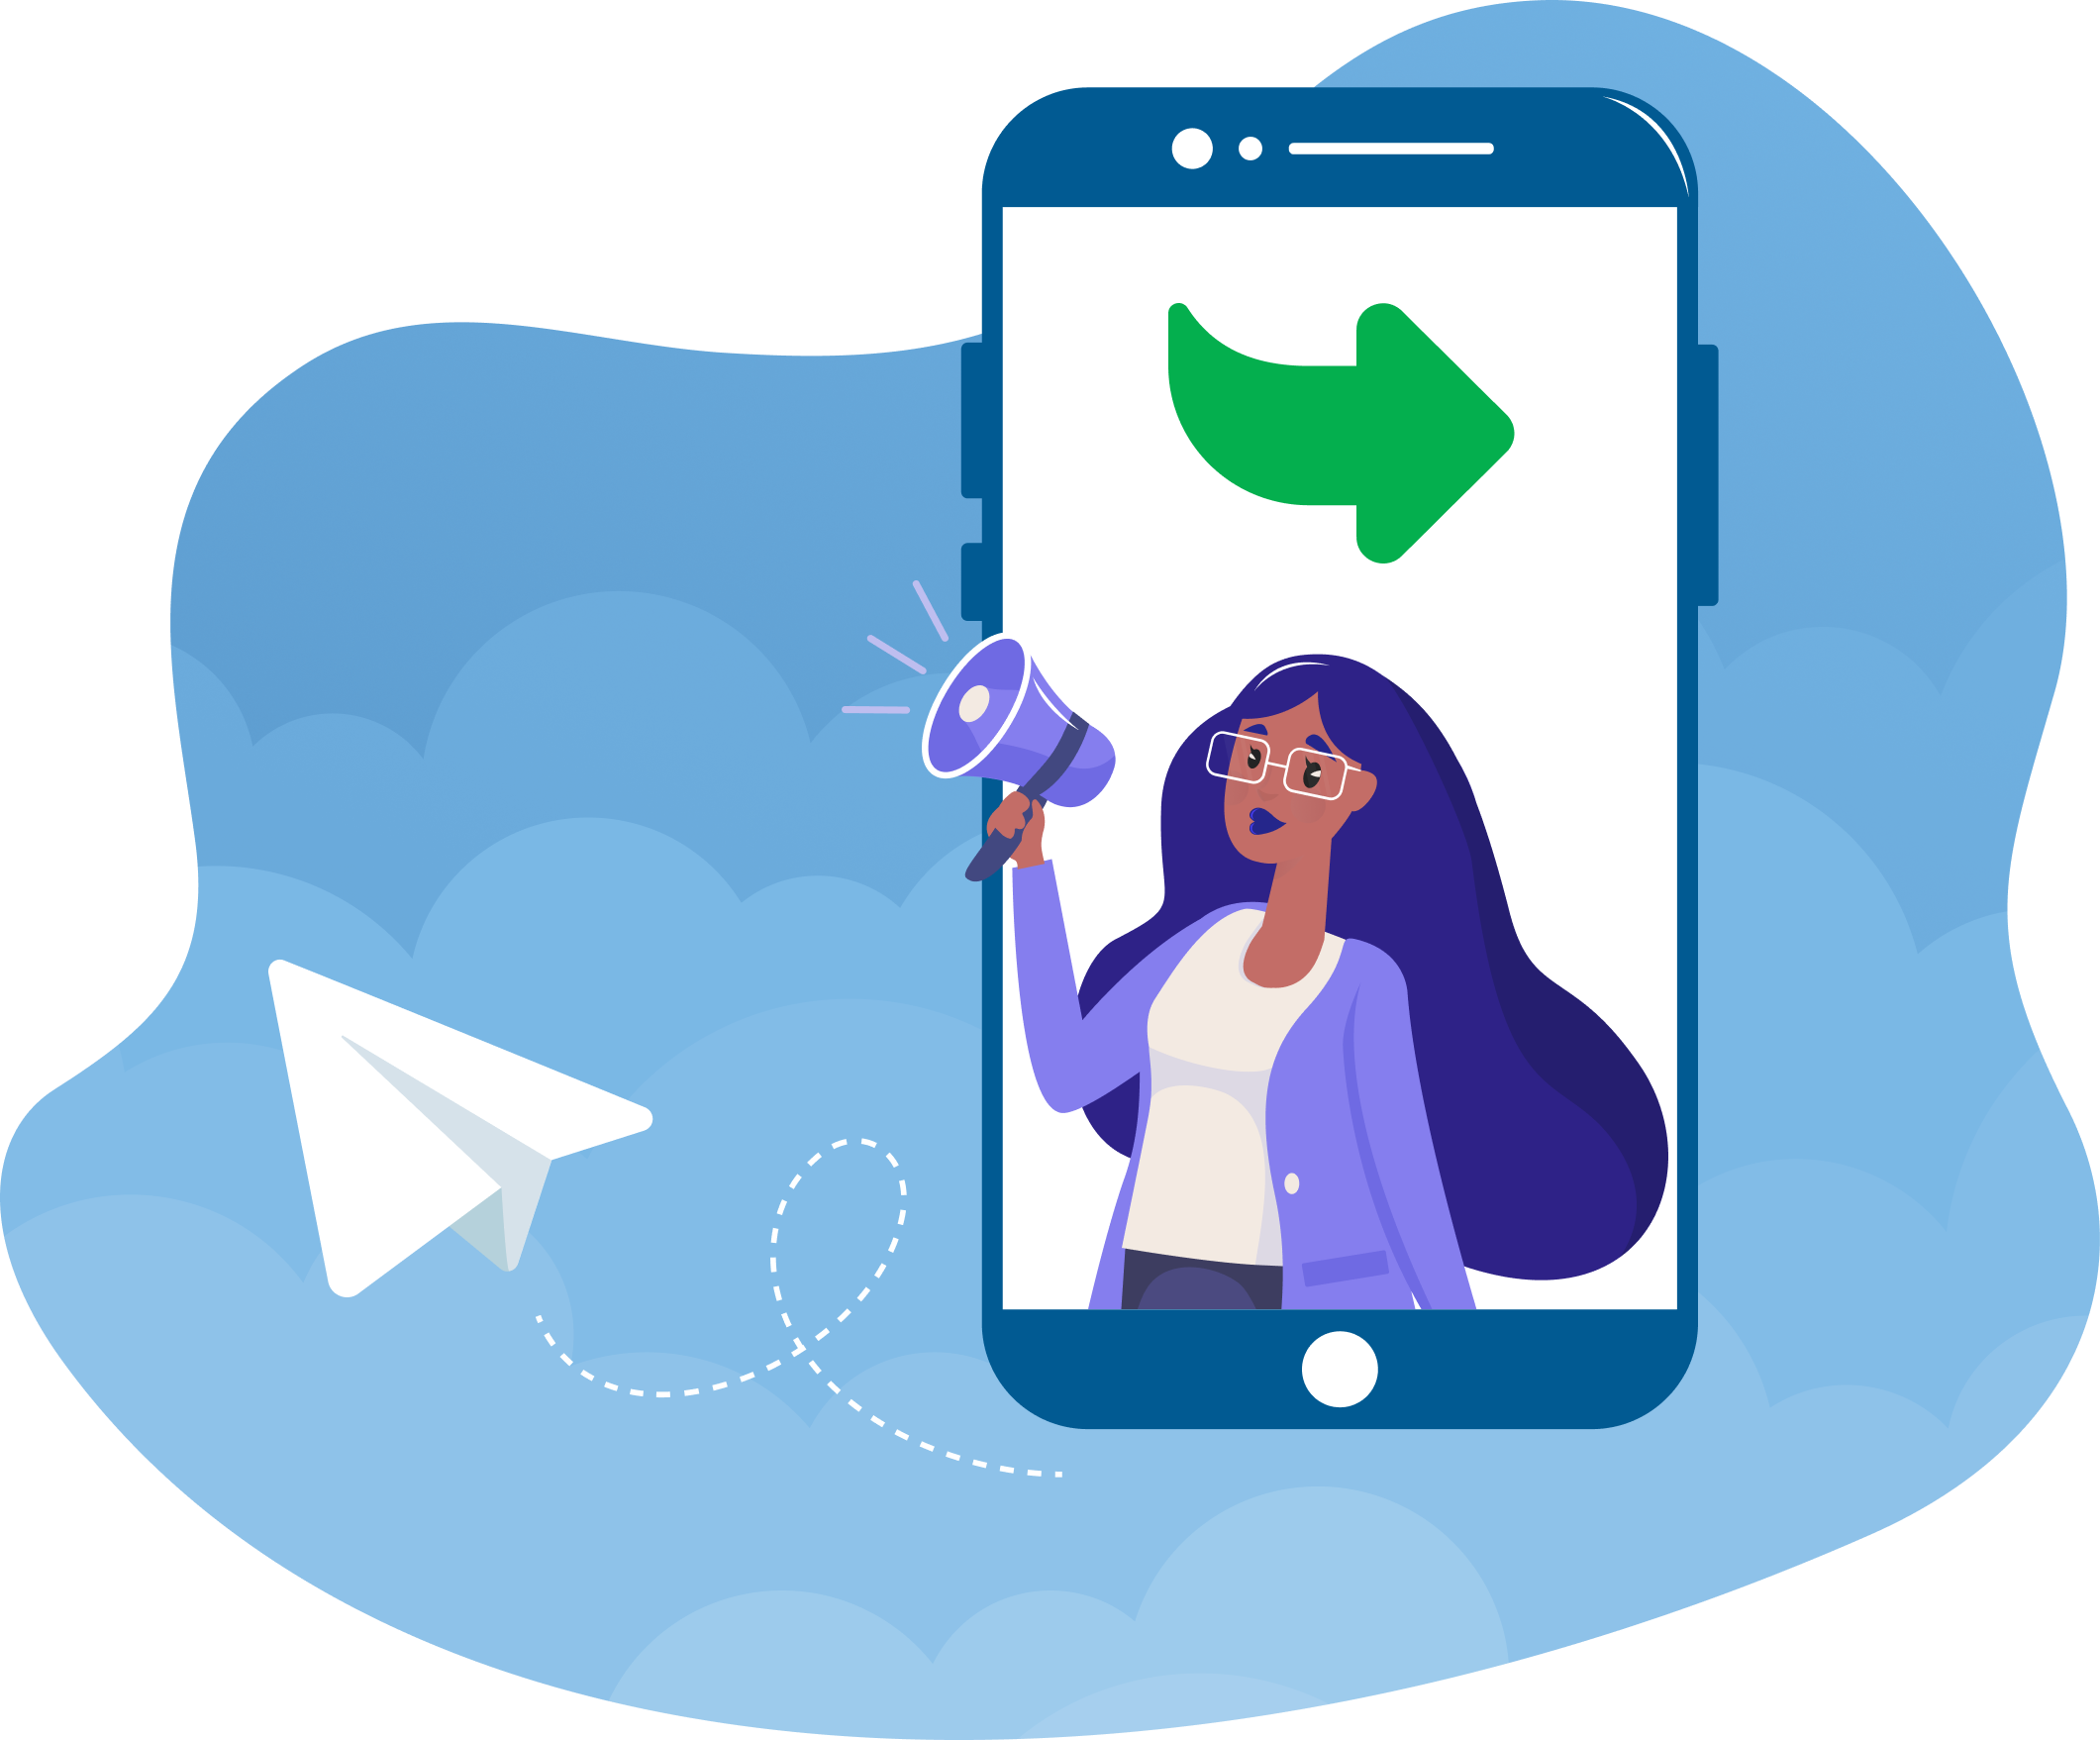 Use telegram as a new delivery channel